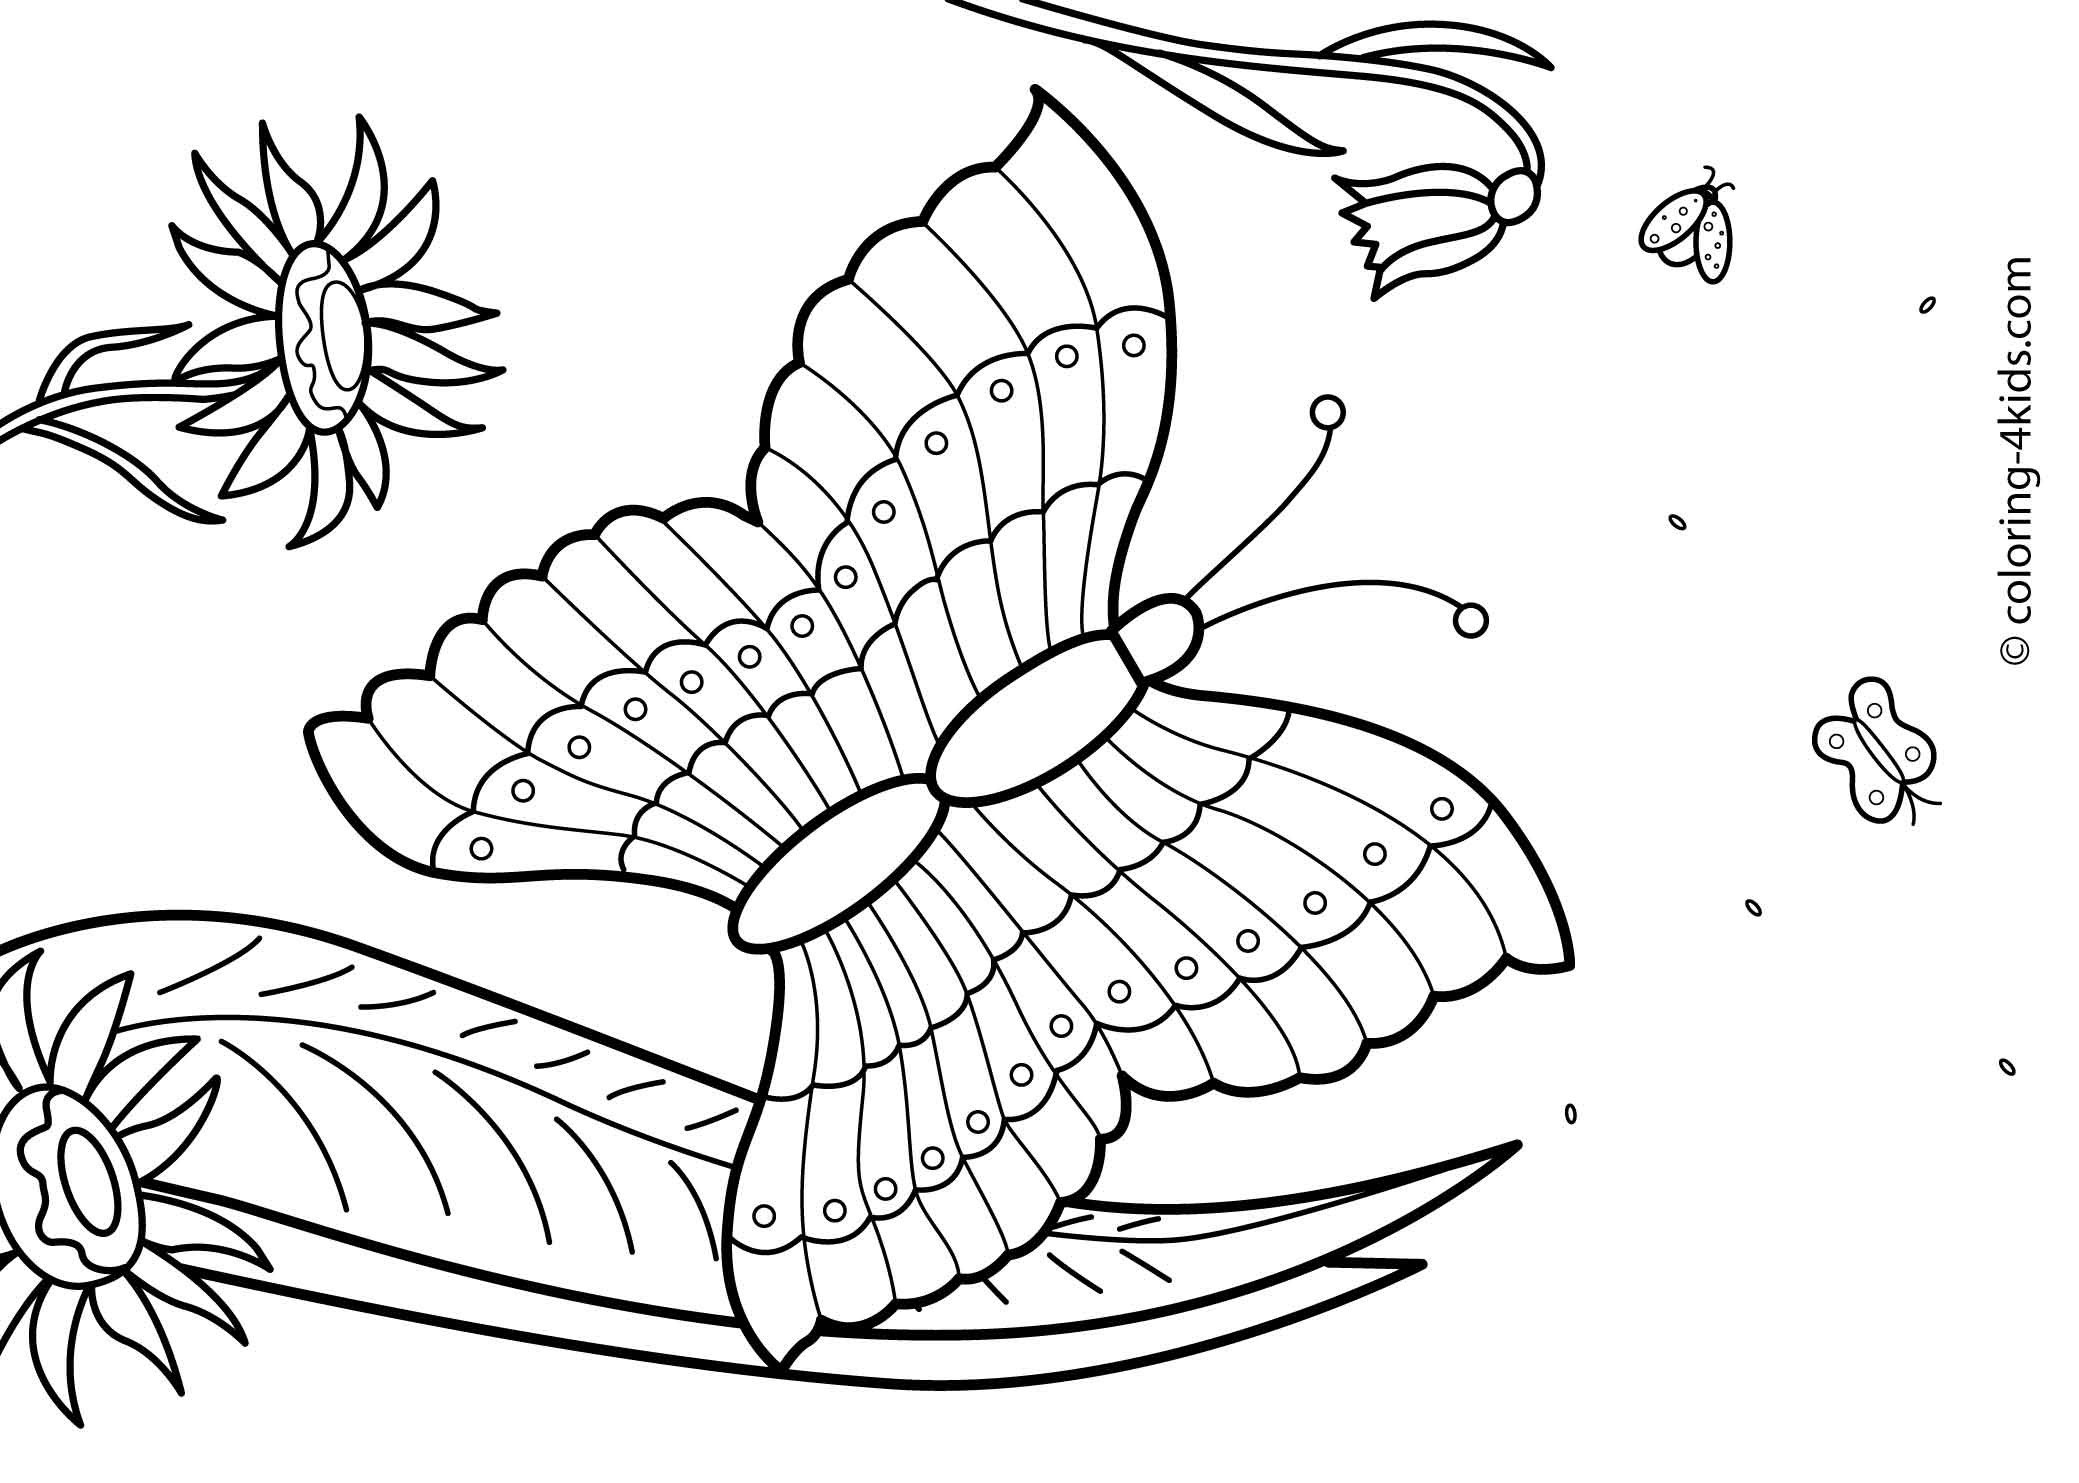 Summer Printable Coloring Pages
 27 Summer season coloring pages part 2